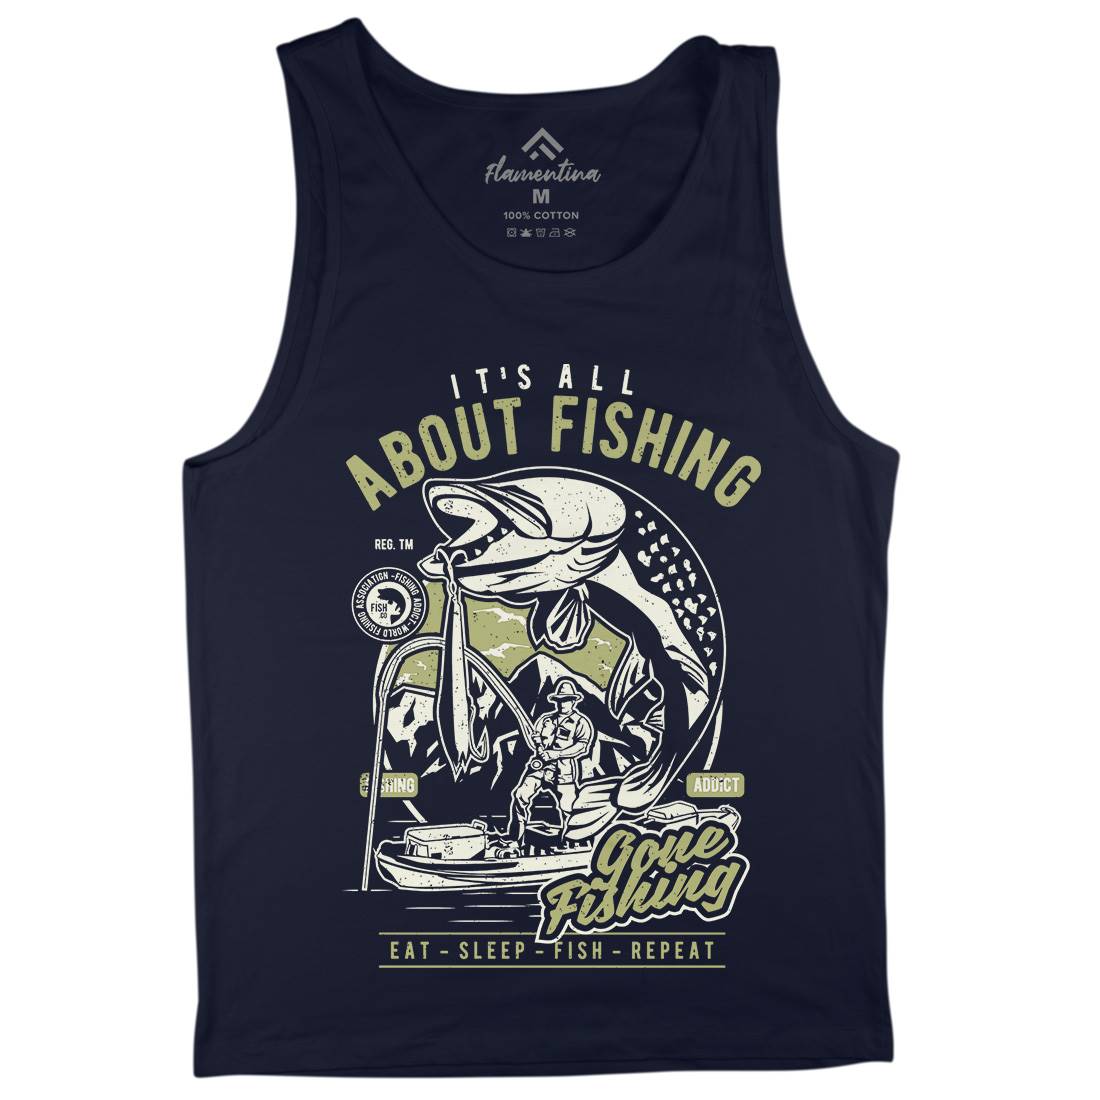 All About Mens Tank Top Vest Fishing A604